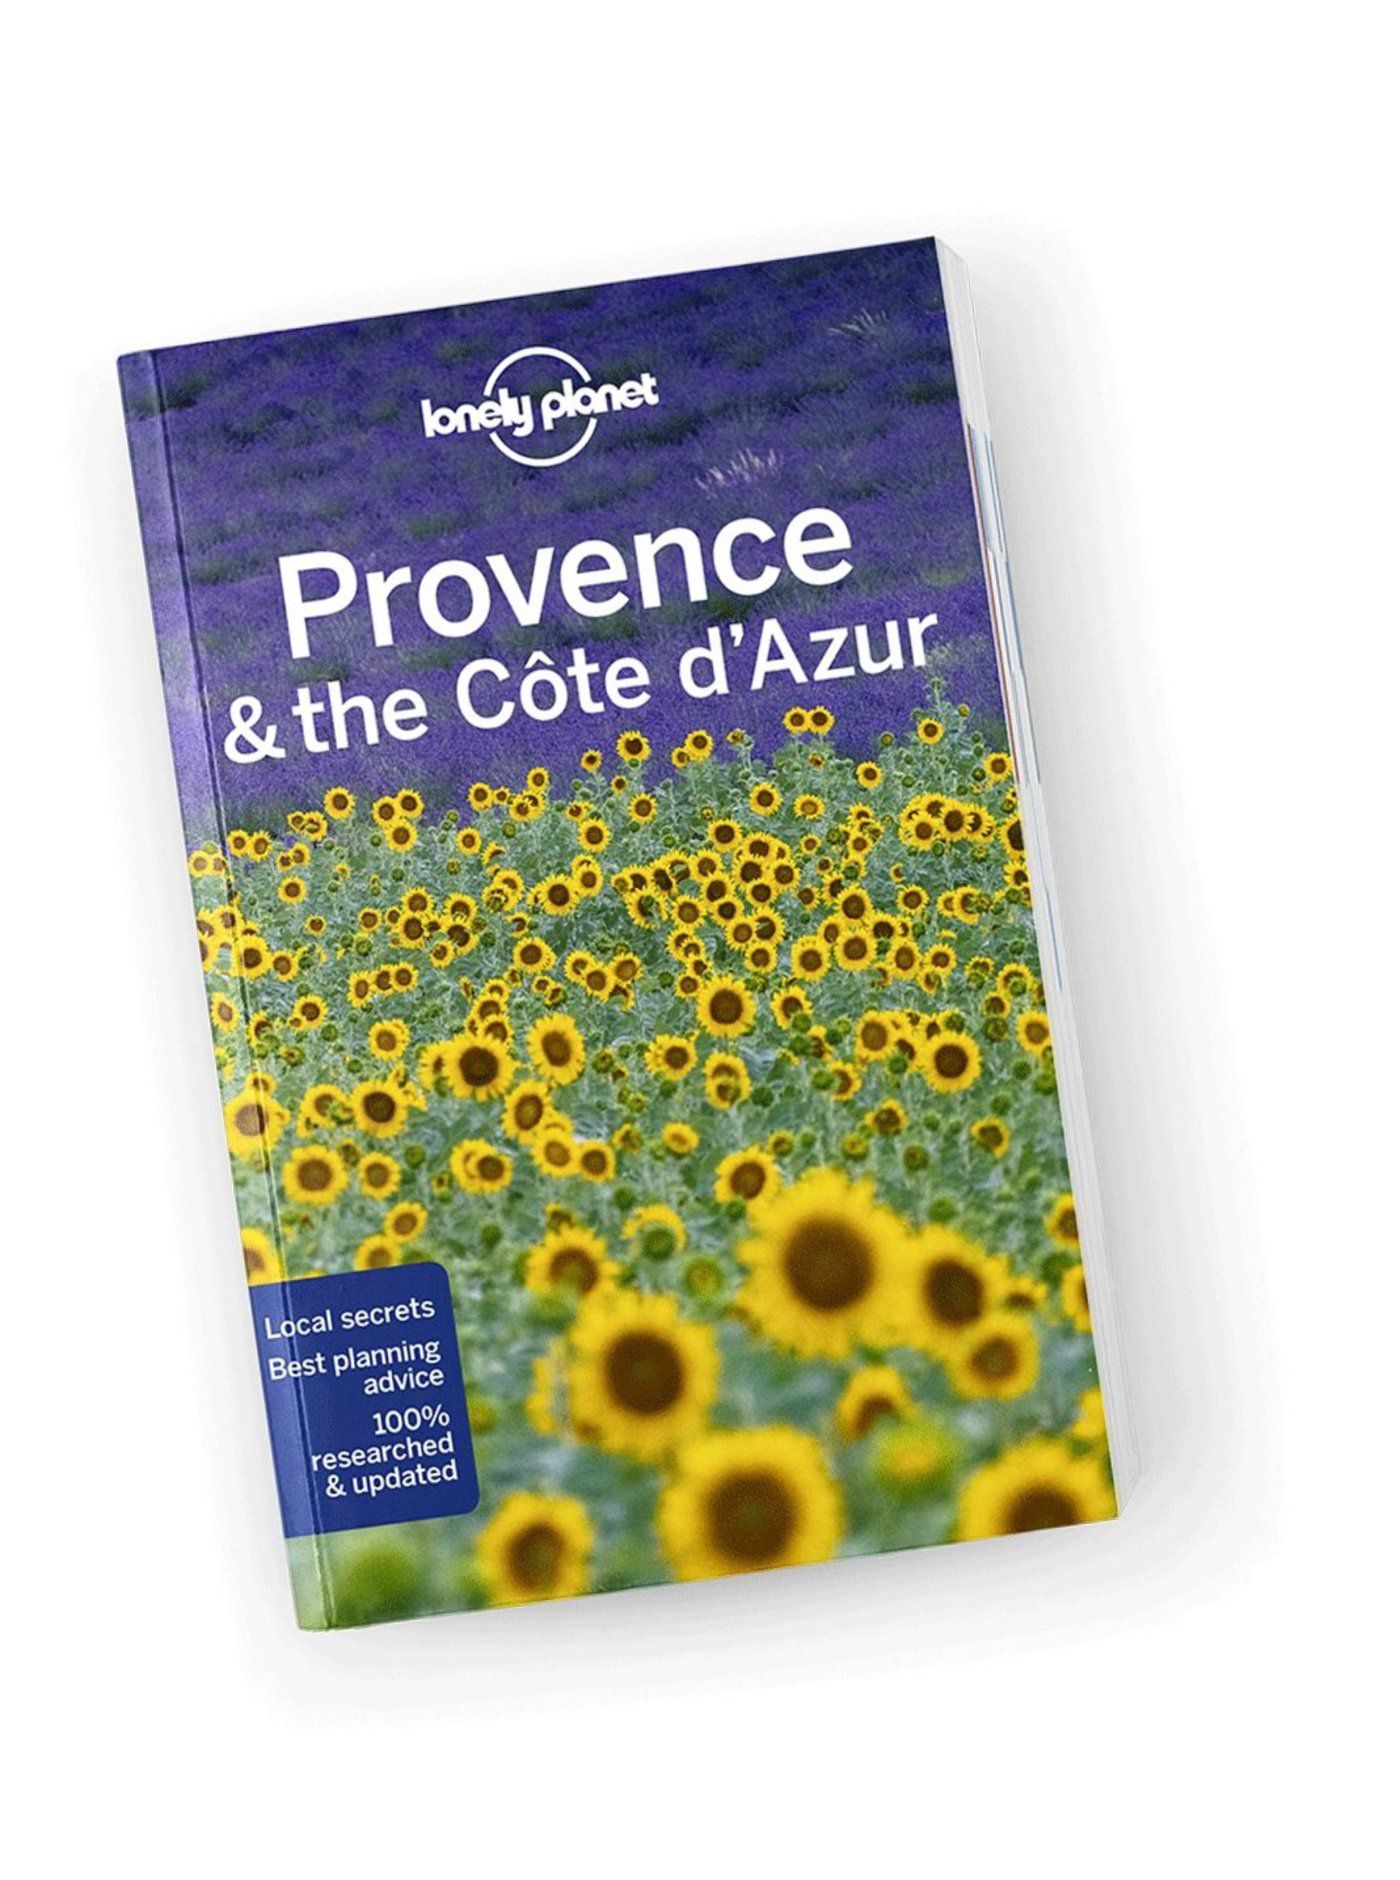 Provence & the Cote d'Azur Lonely Planet